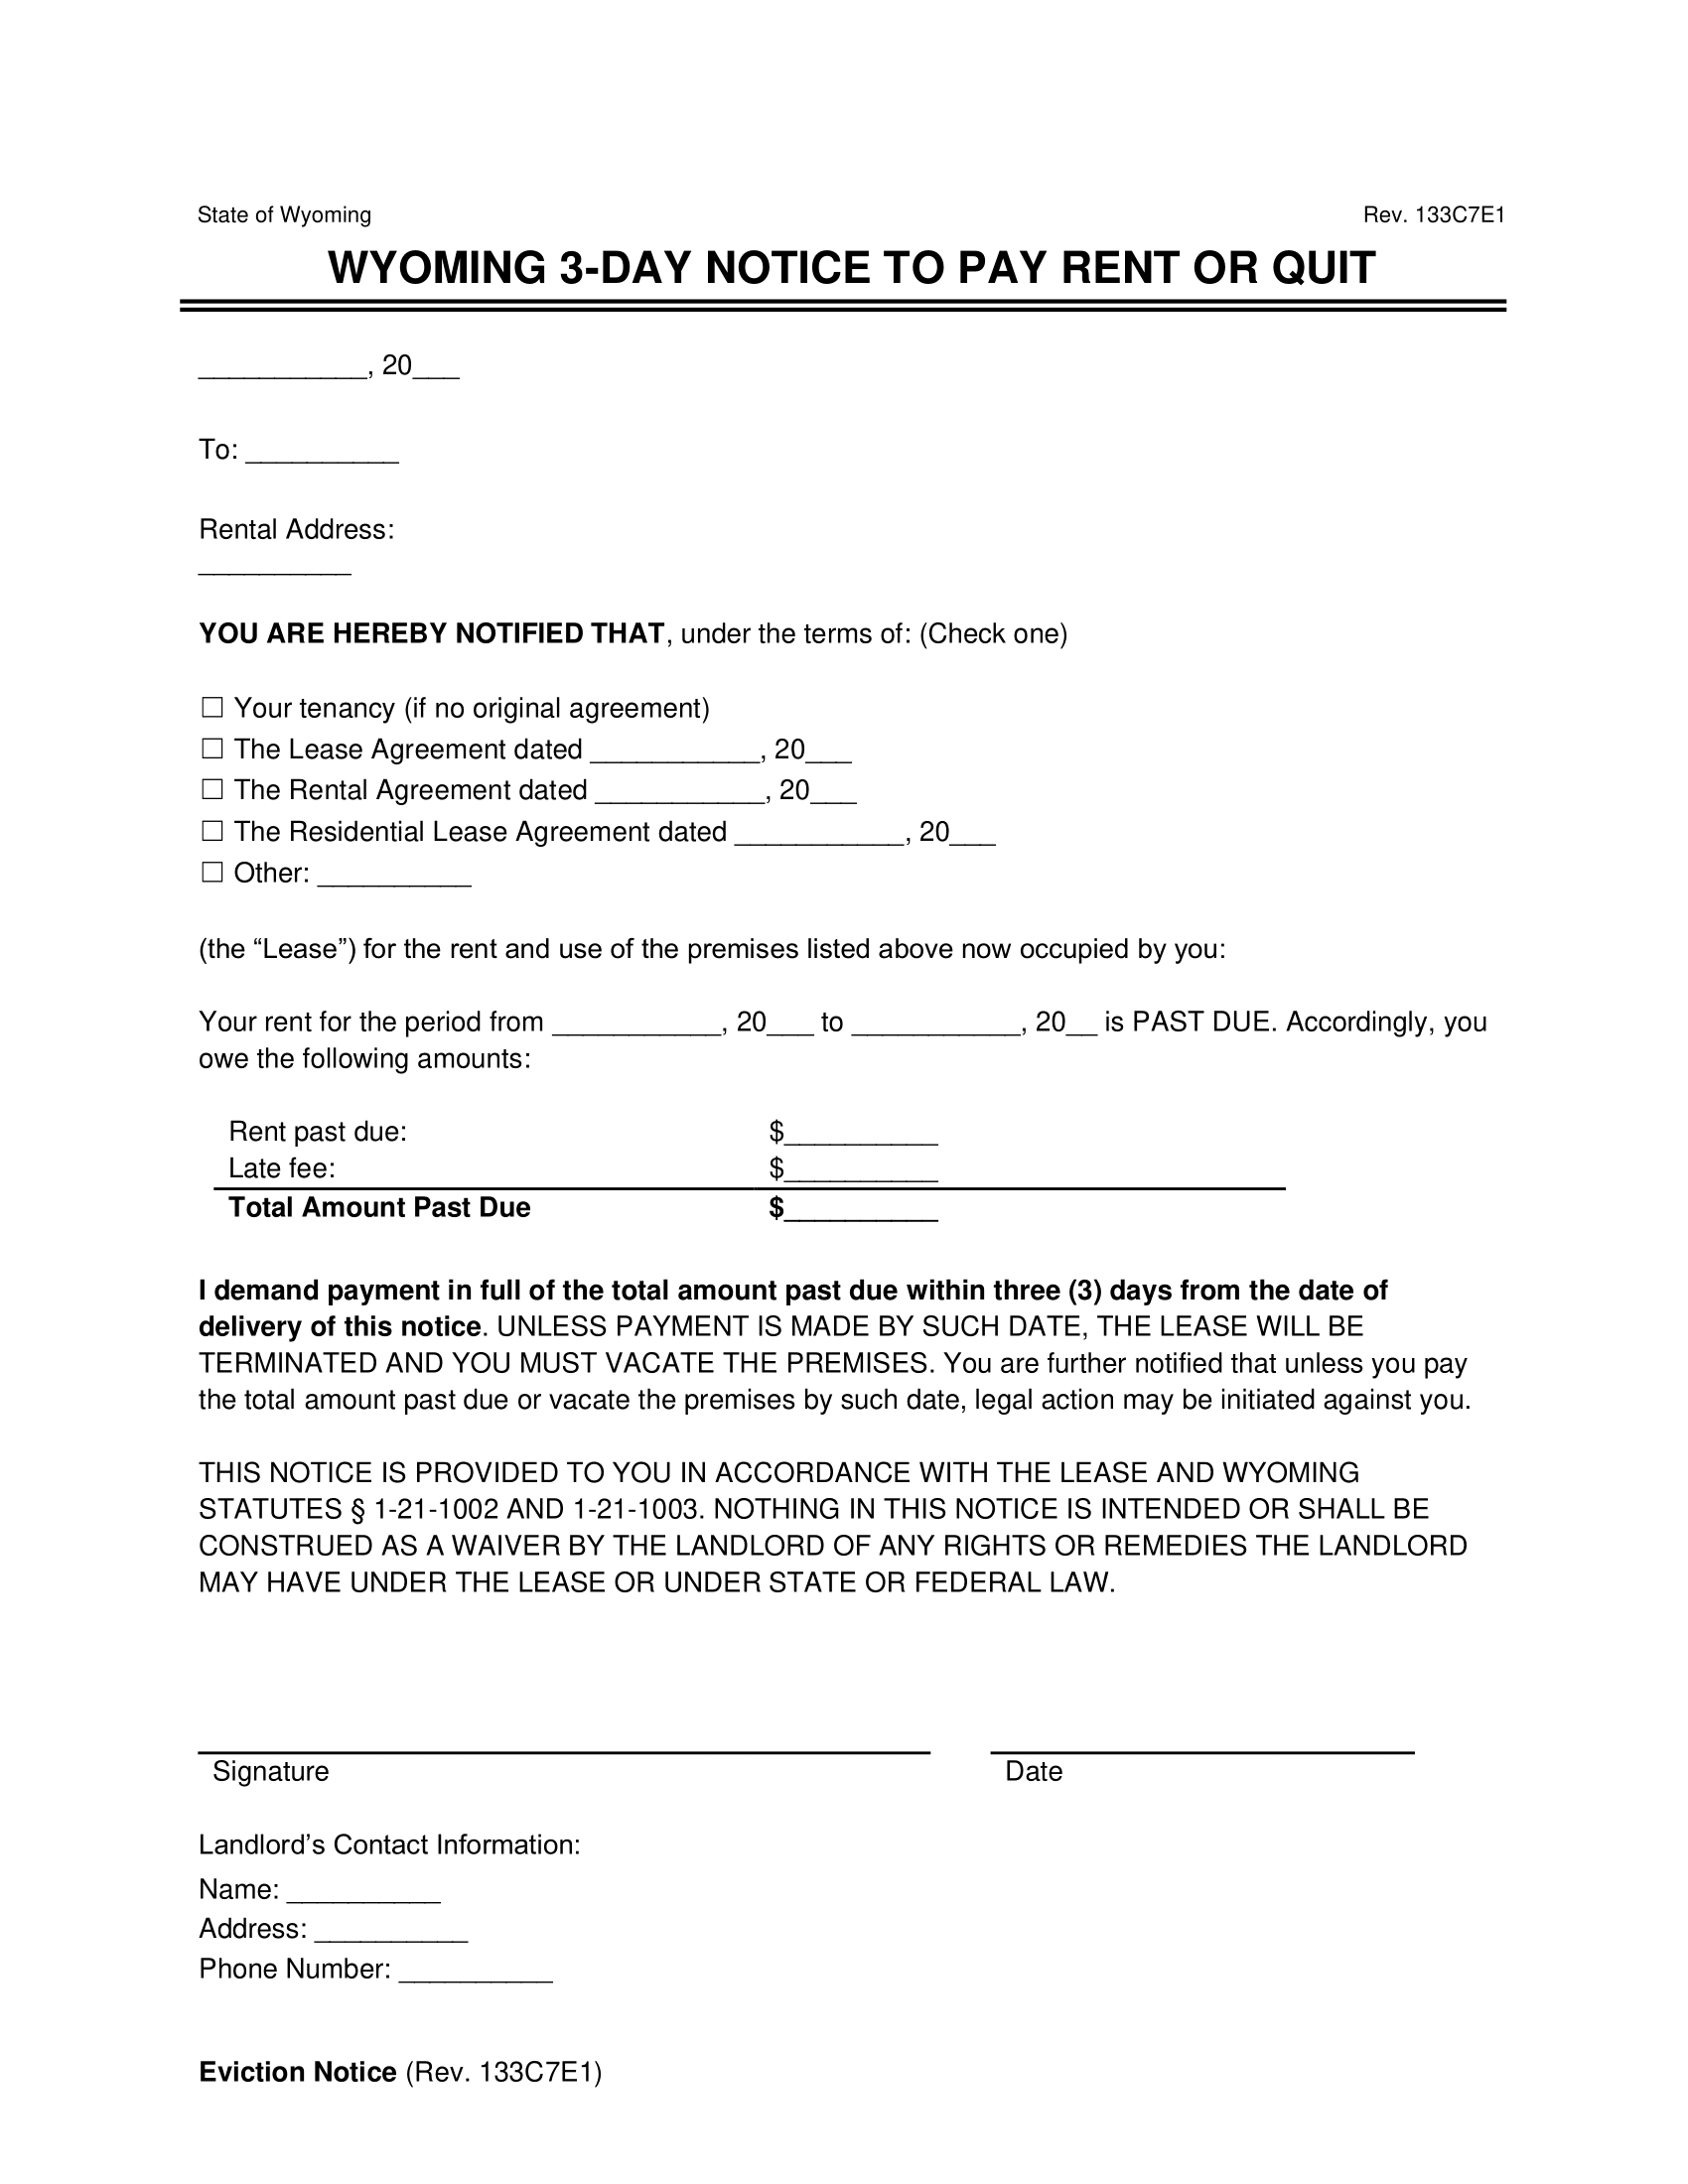 Wyoming 3-Day Eviction Notice to Quit (Non-Payment of Rent)